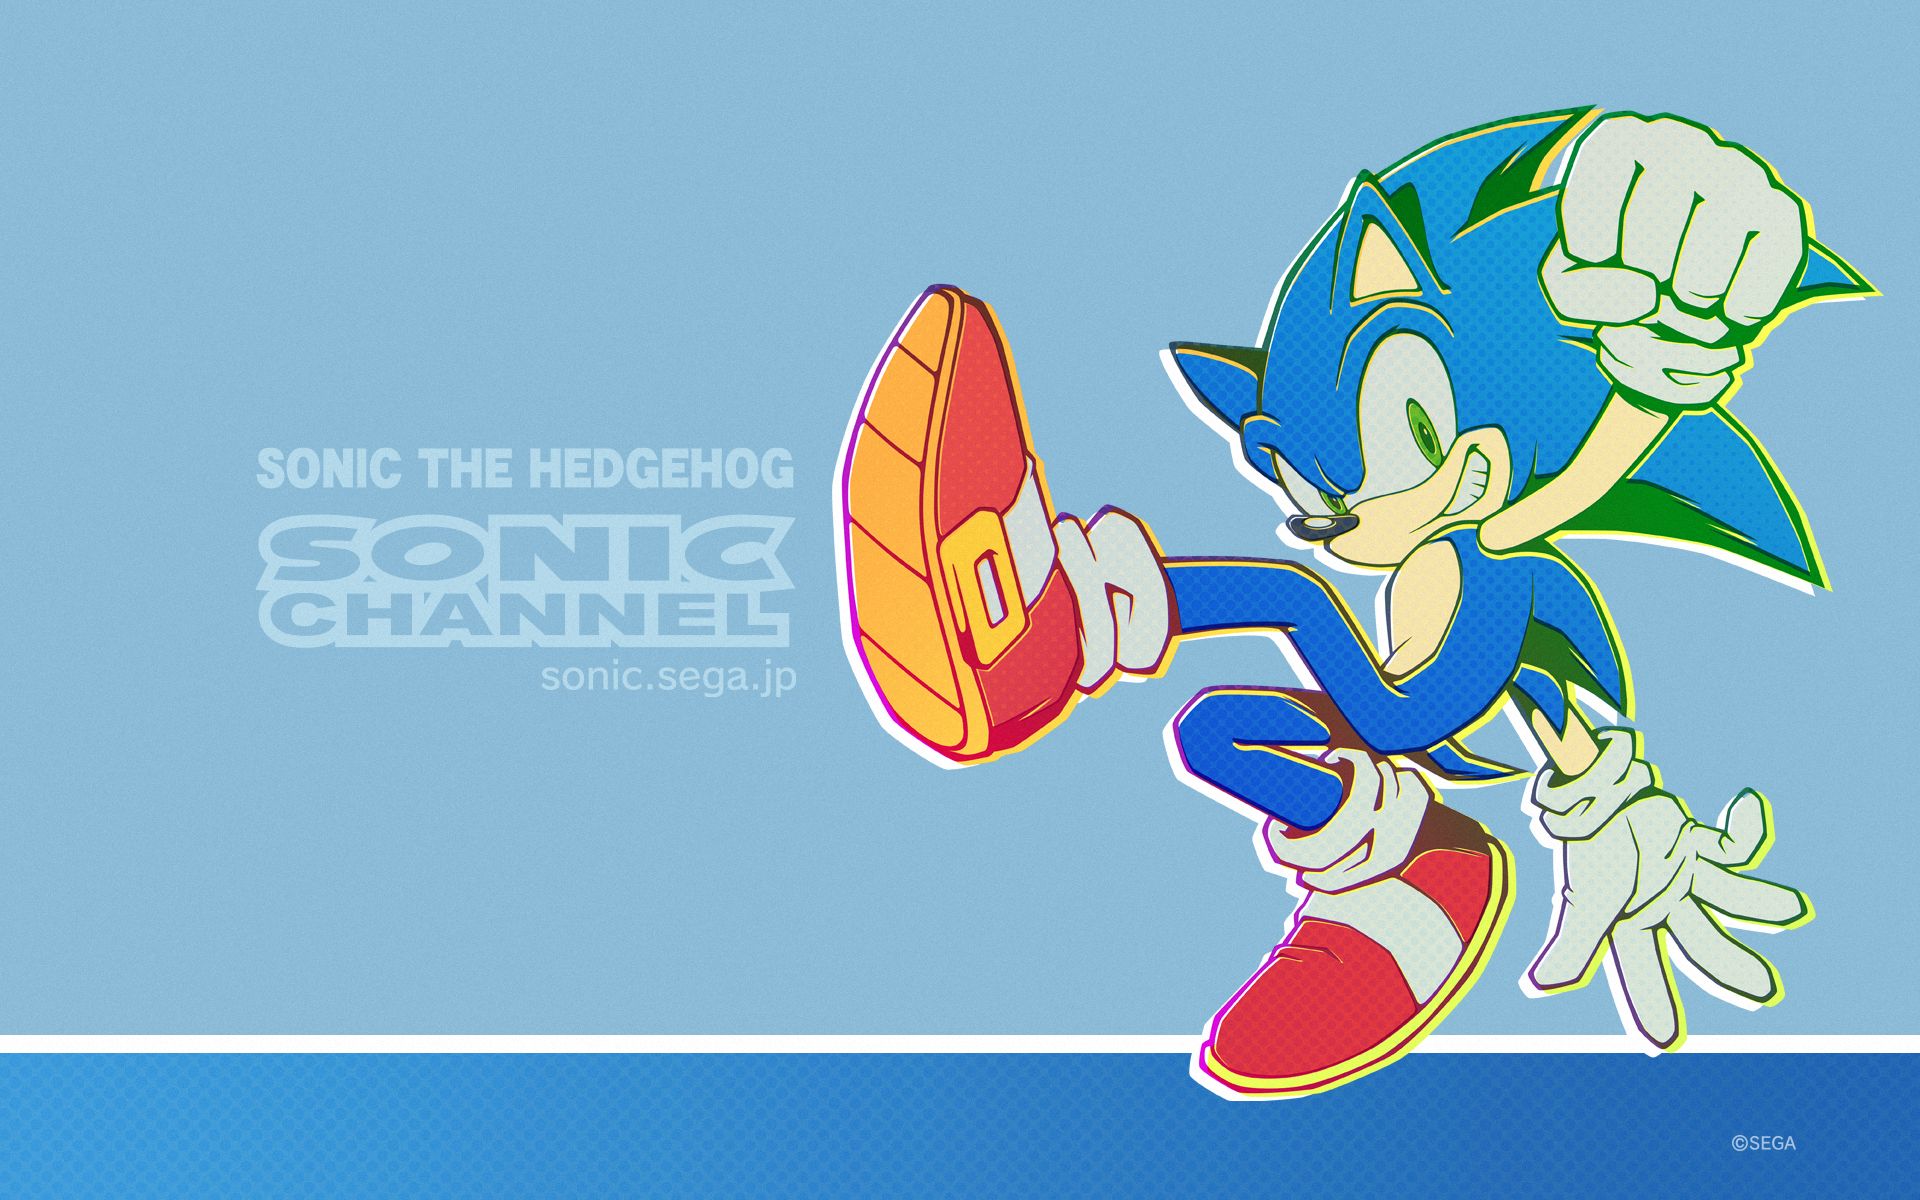 video game, sonic the hedgehog, green eyes, smile, sneakers, sonic channel, sonic